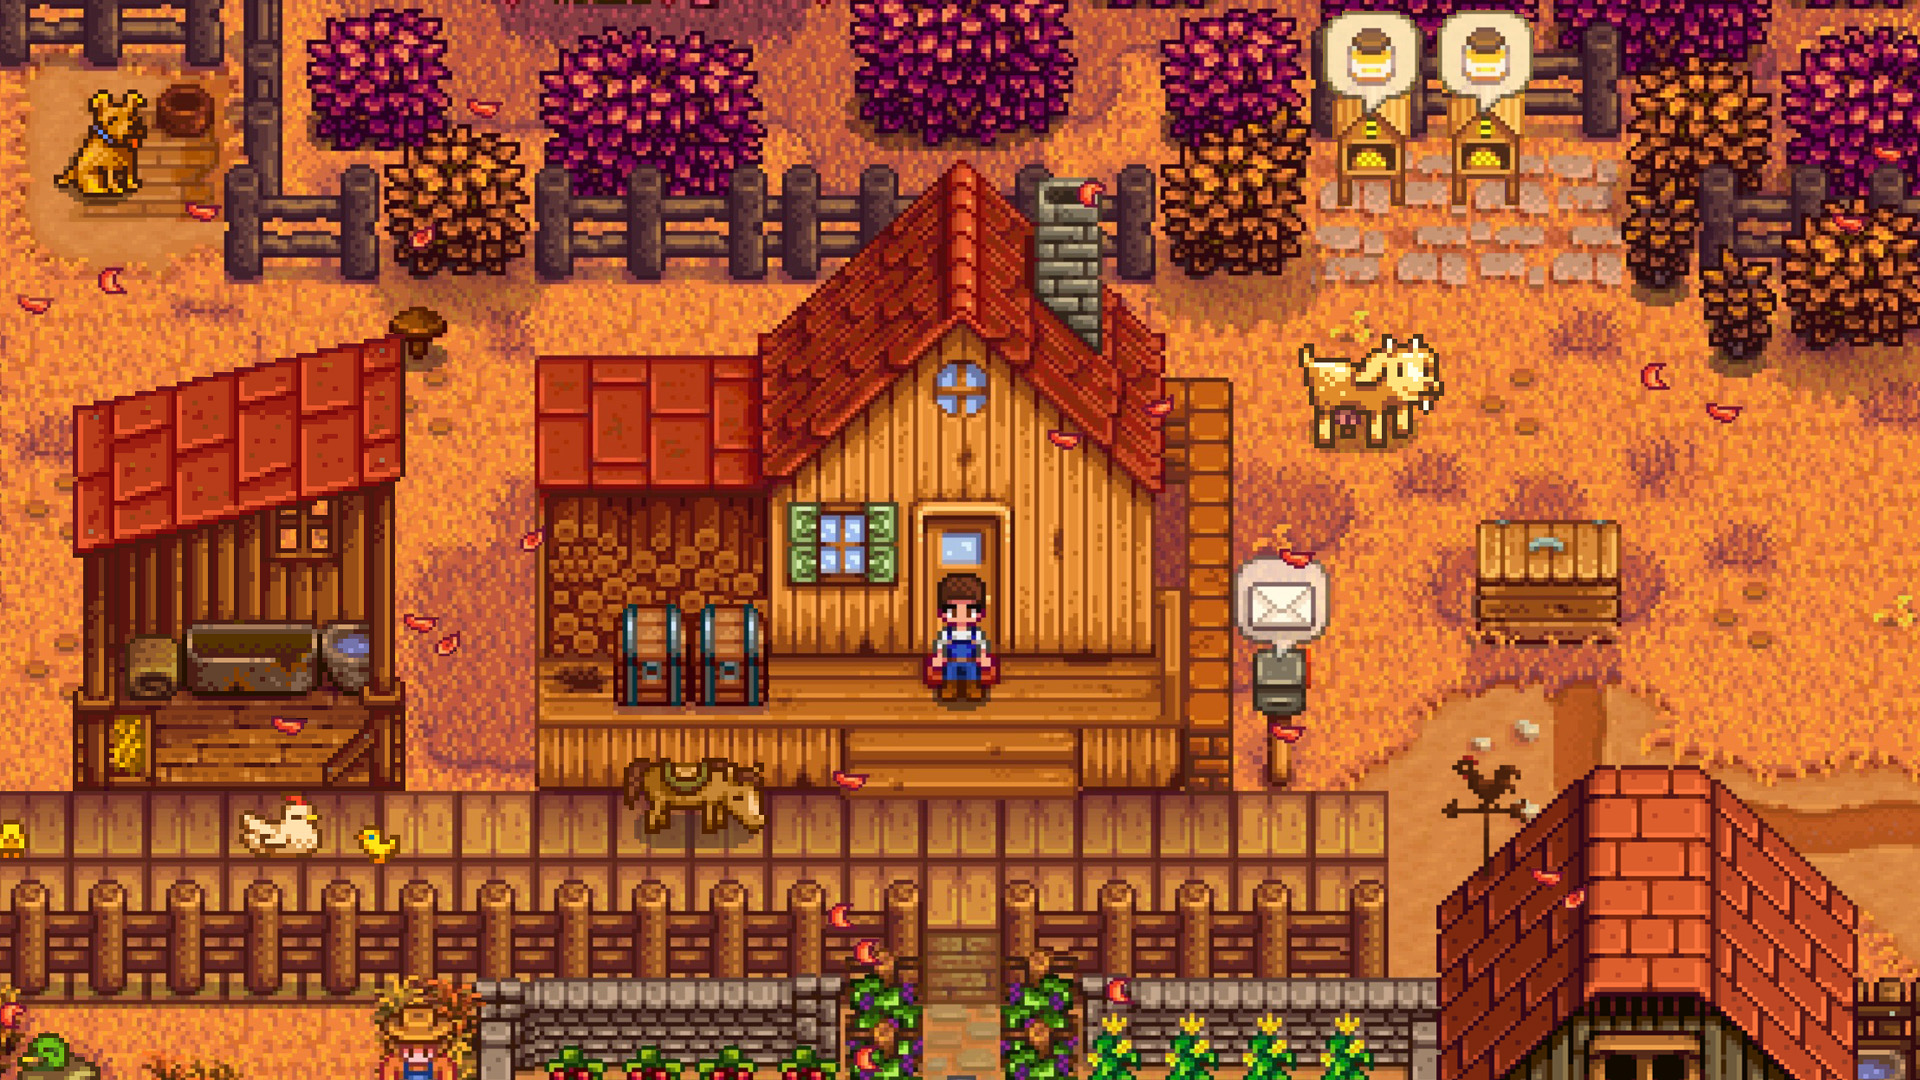 An image of the player character standing in their farm in during the fall season in Stardew Valley.